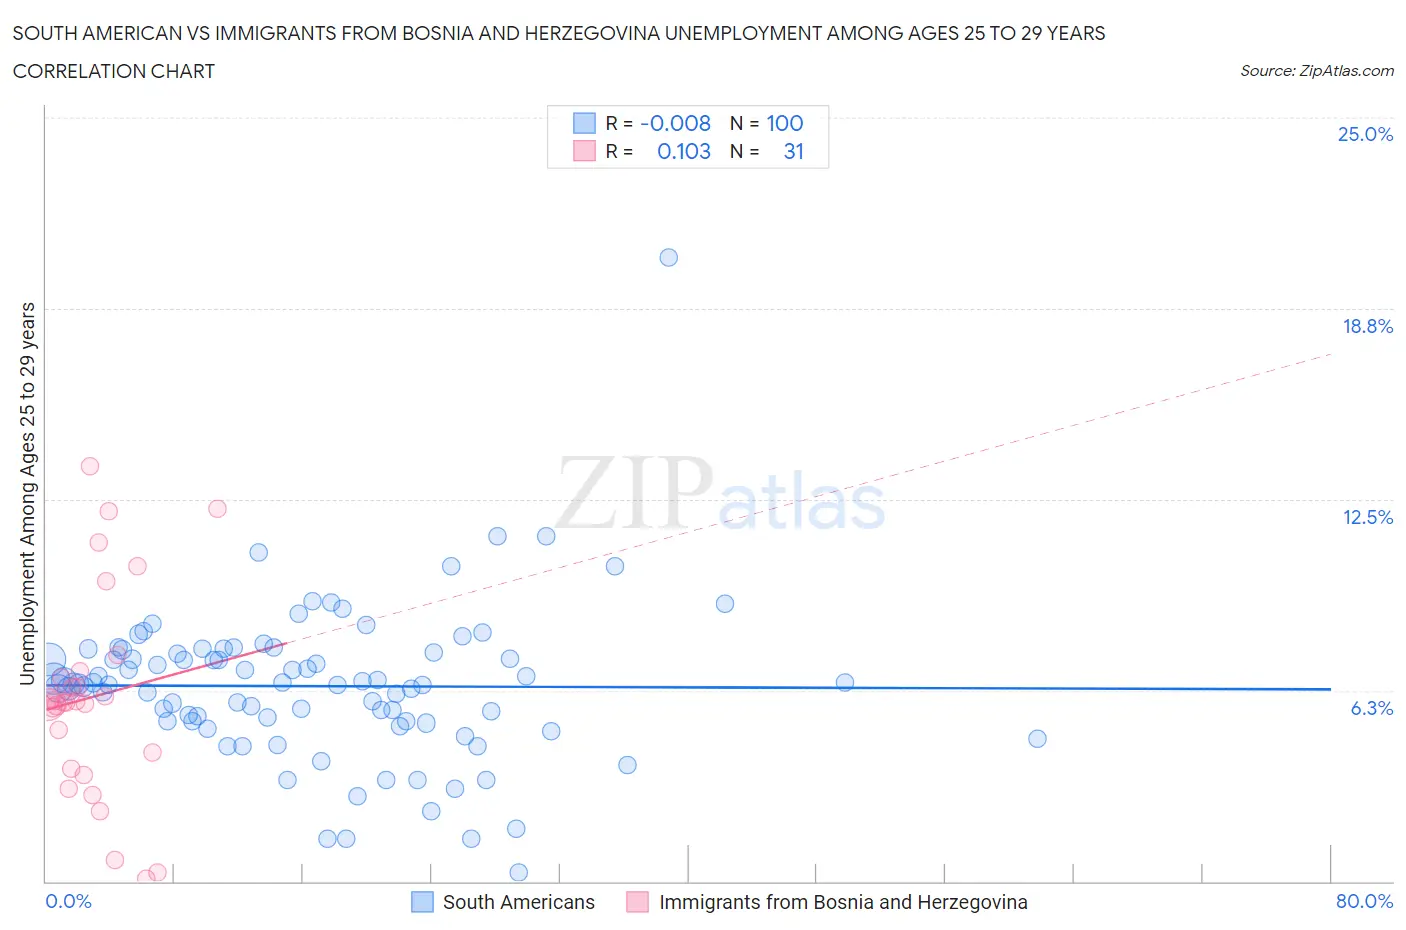 South American vs Immigrants from Bosnia and Herzegovina Unemployment Among Ages 25 to 29 years